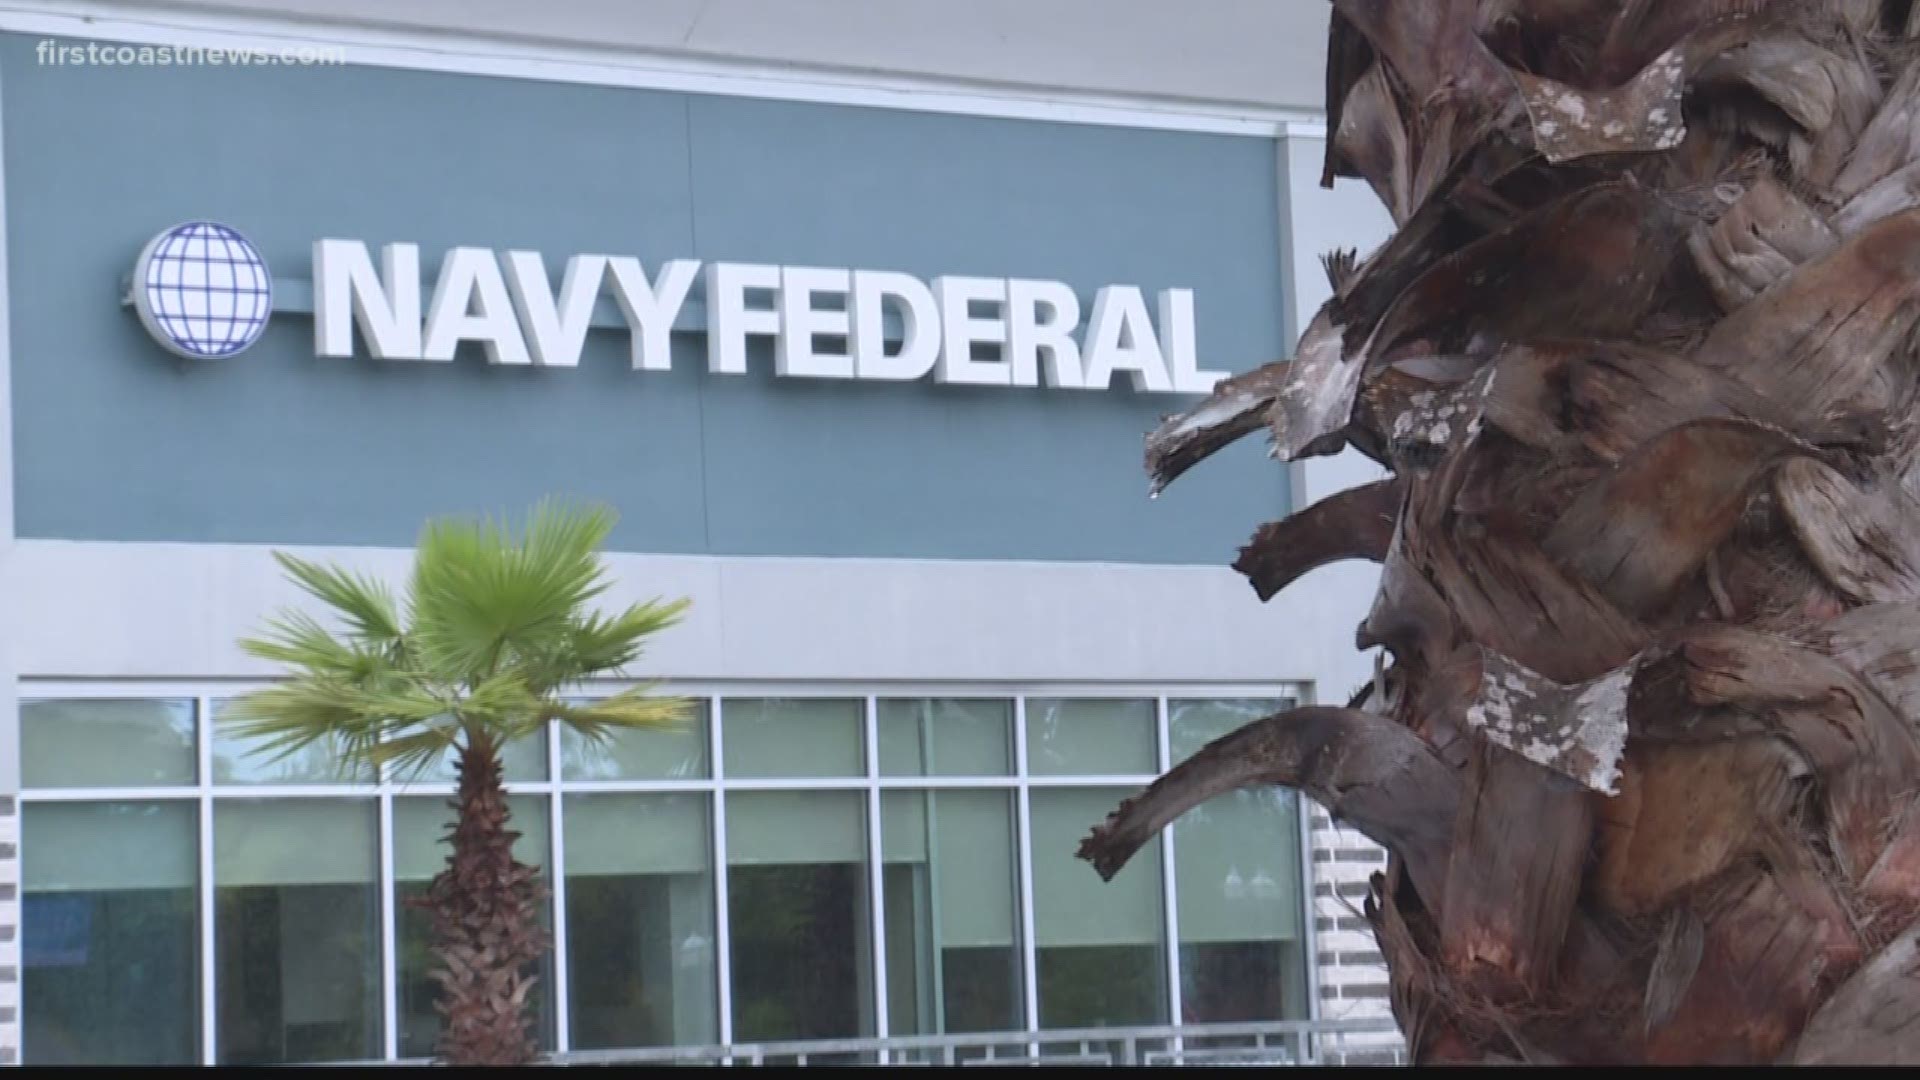 Navy Federal customers said via Twitter that their cards are being declined after the credit union announced it is experiencing technical issues.